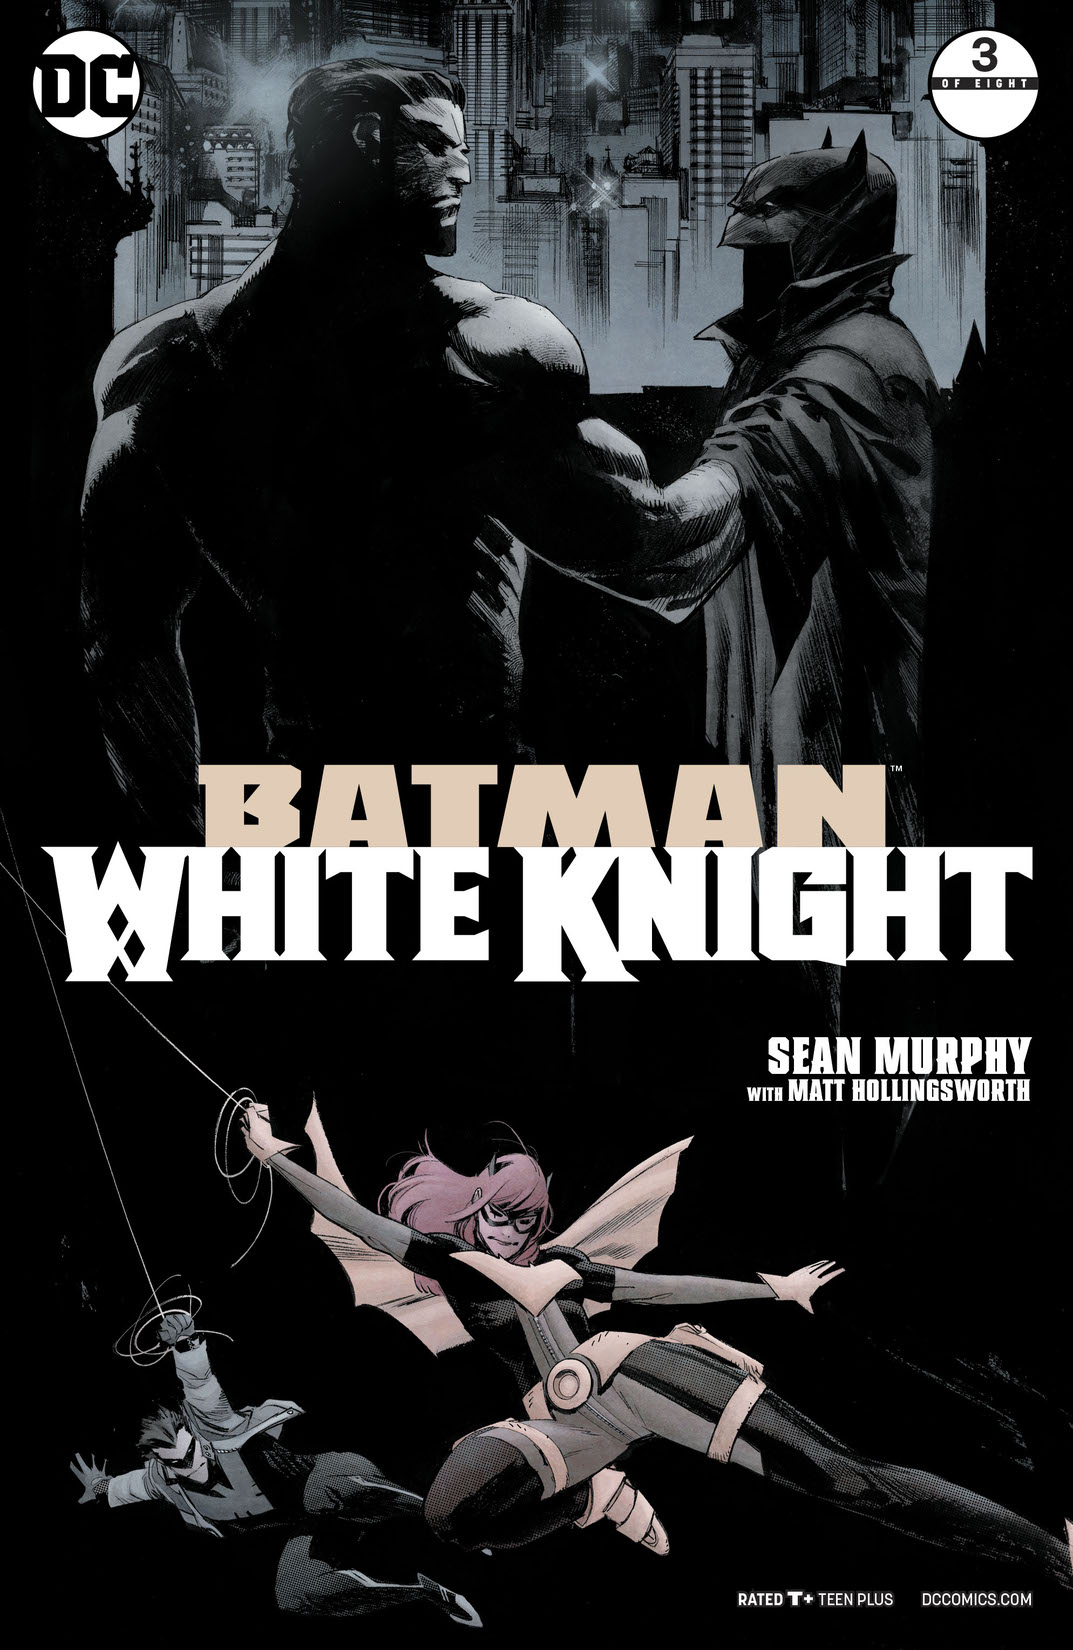 Batman: White Knight #3 preview images